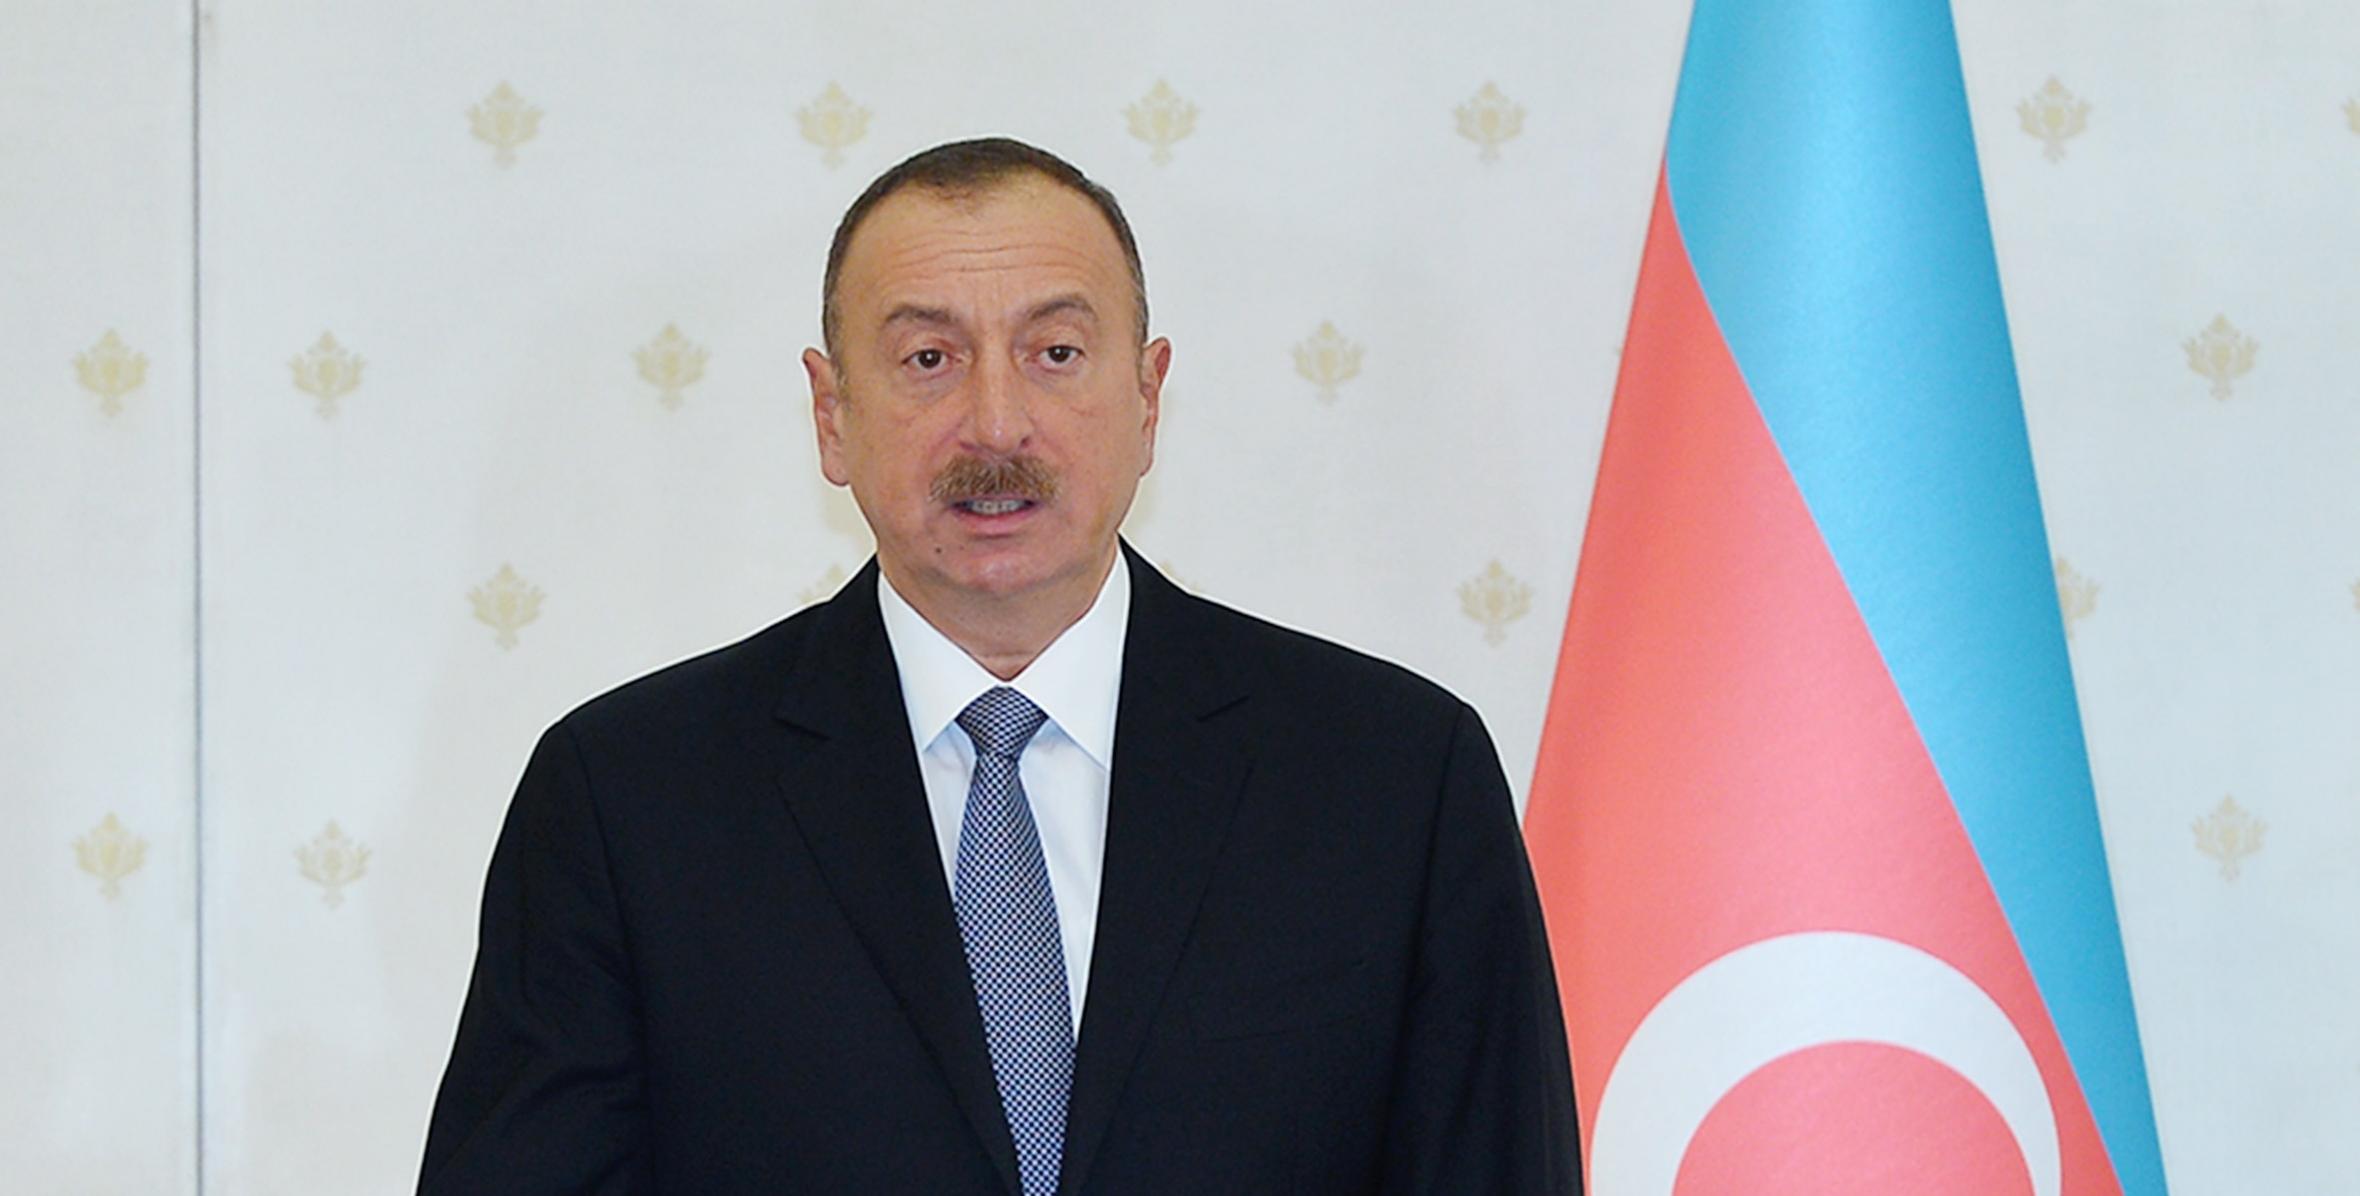 Opening speech by Ilham Aliyev at the meeting of Cabinet of Ministers dedicated to results of socioeconomic development of 2016 and objectives for future